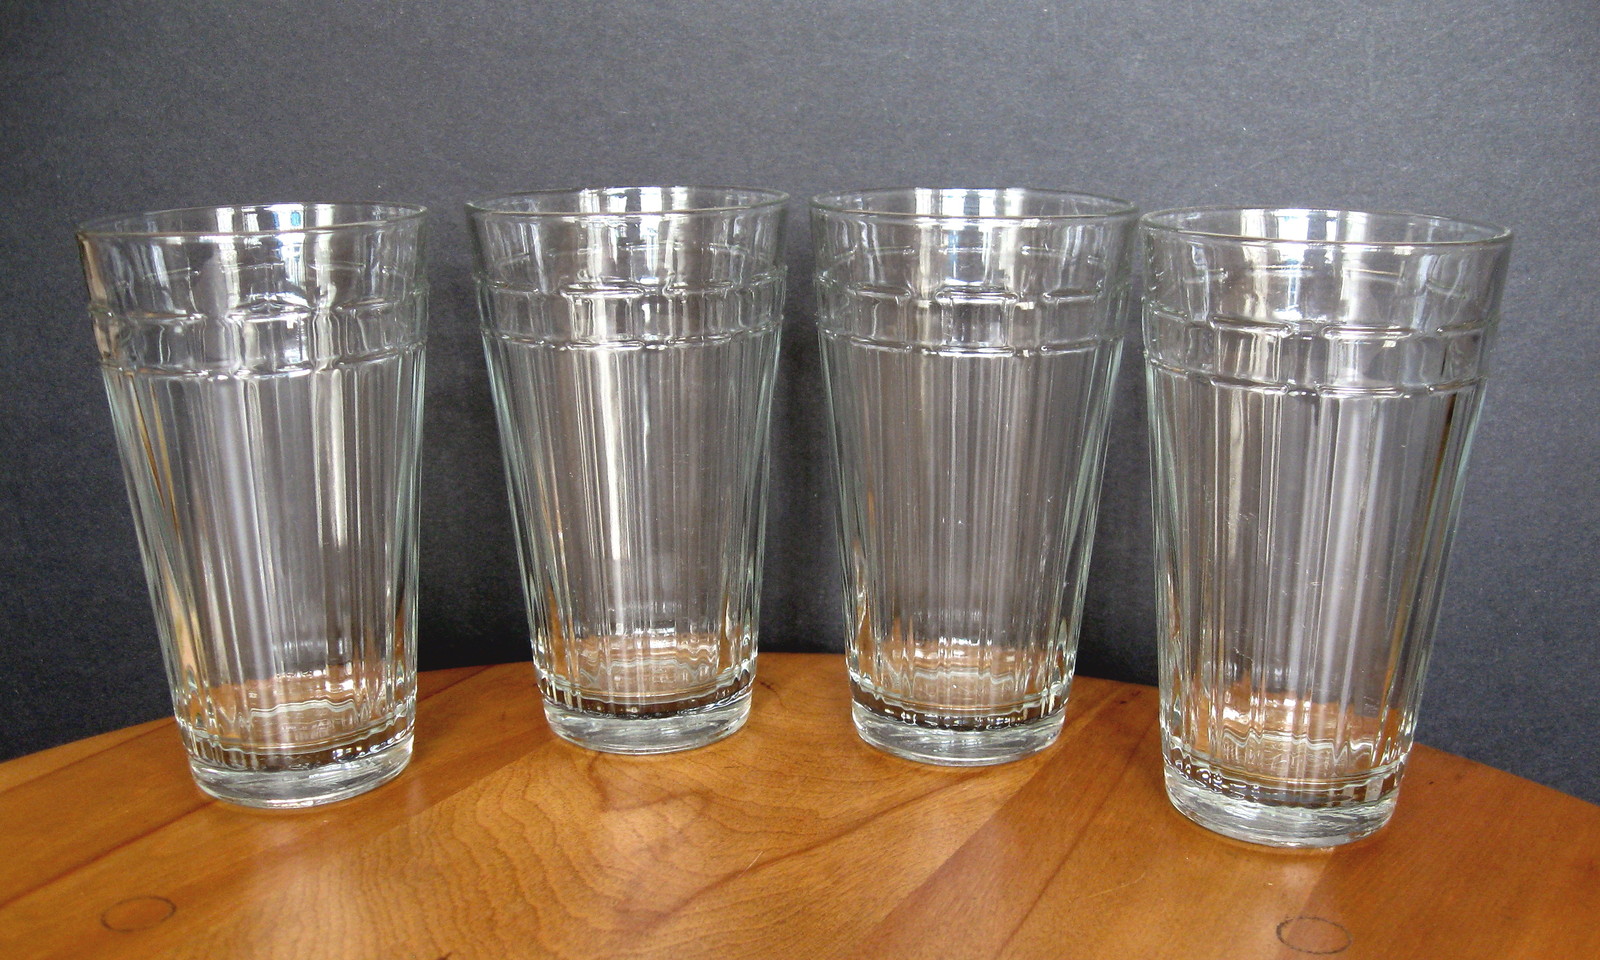 Primary image for Longaberger Glass - Woven Traditions - 16-oz. Flat Tumbler - Two (2) Available